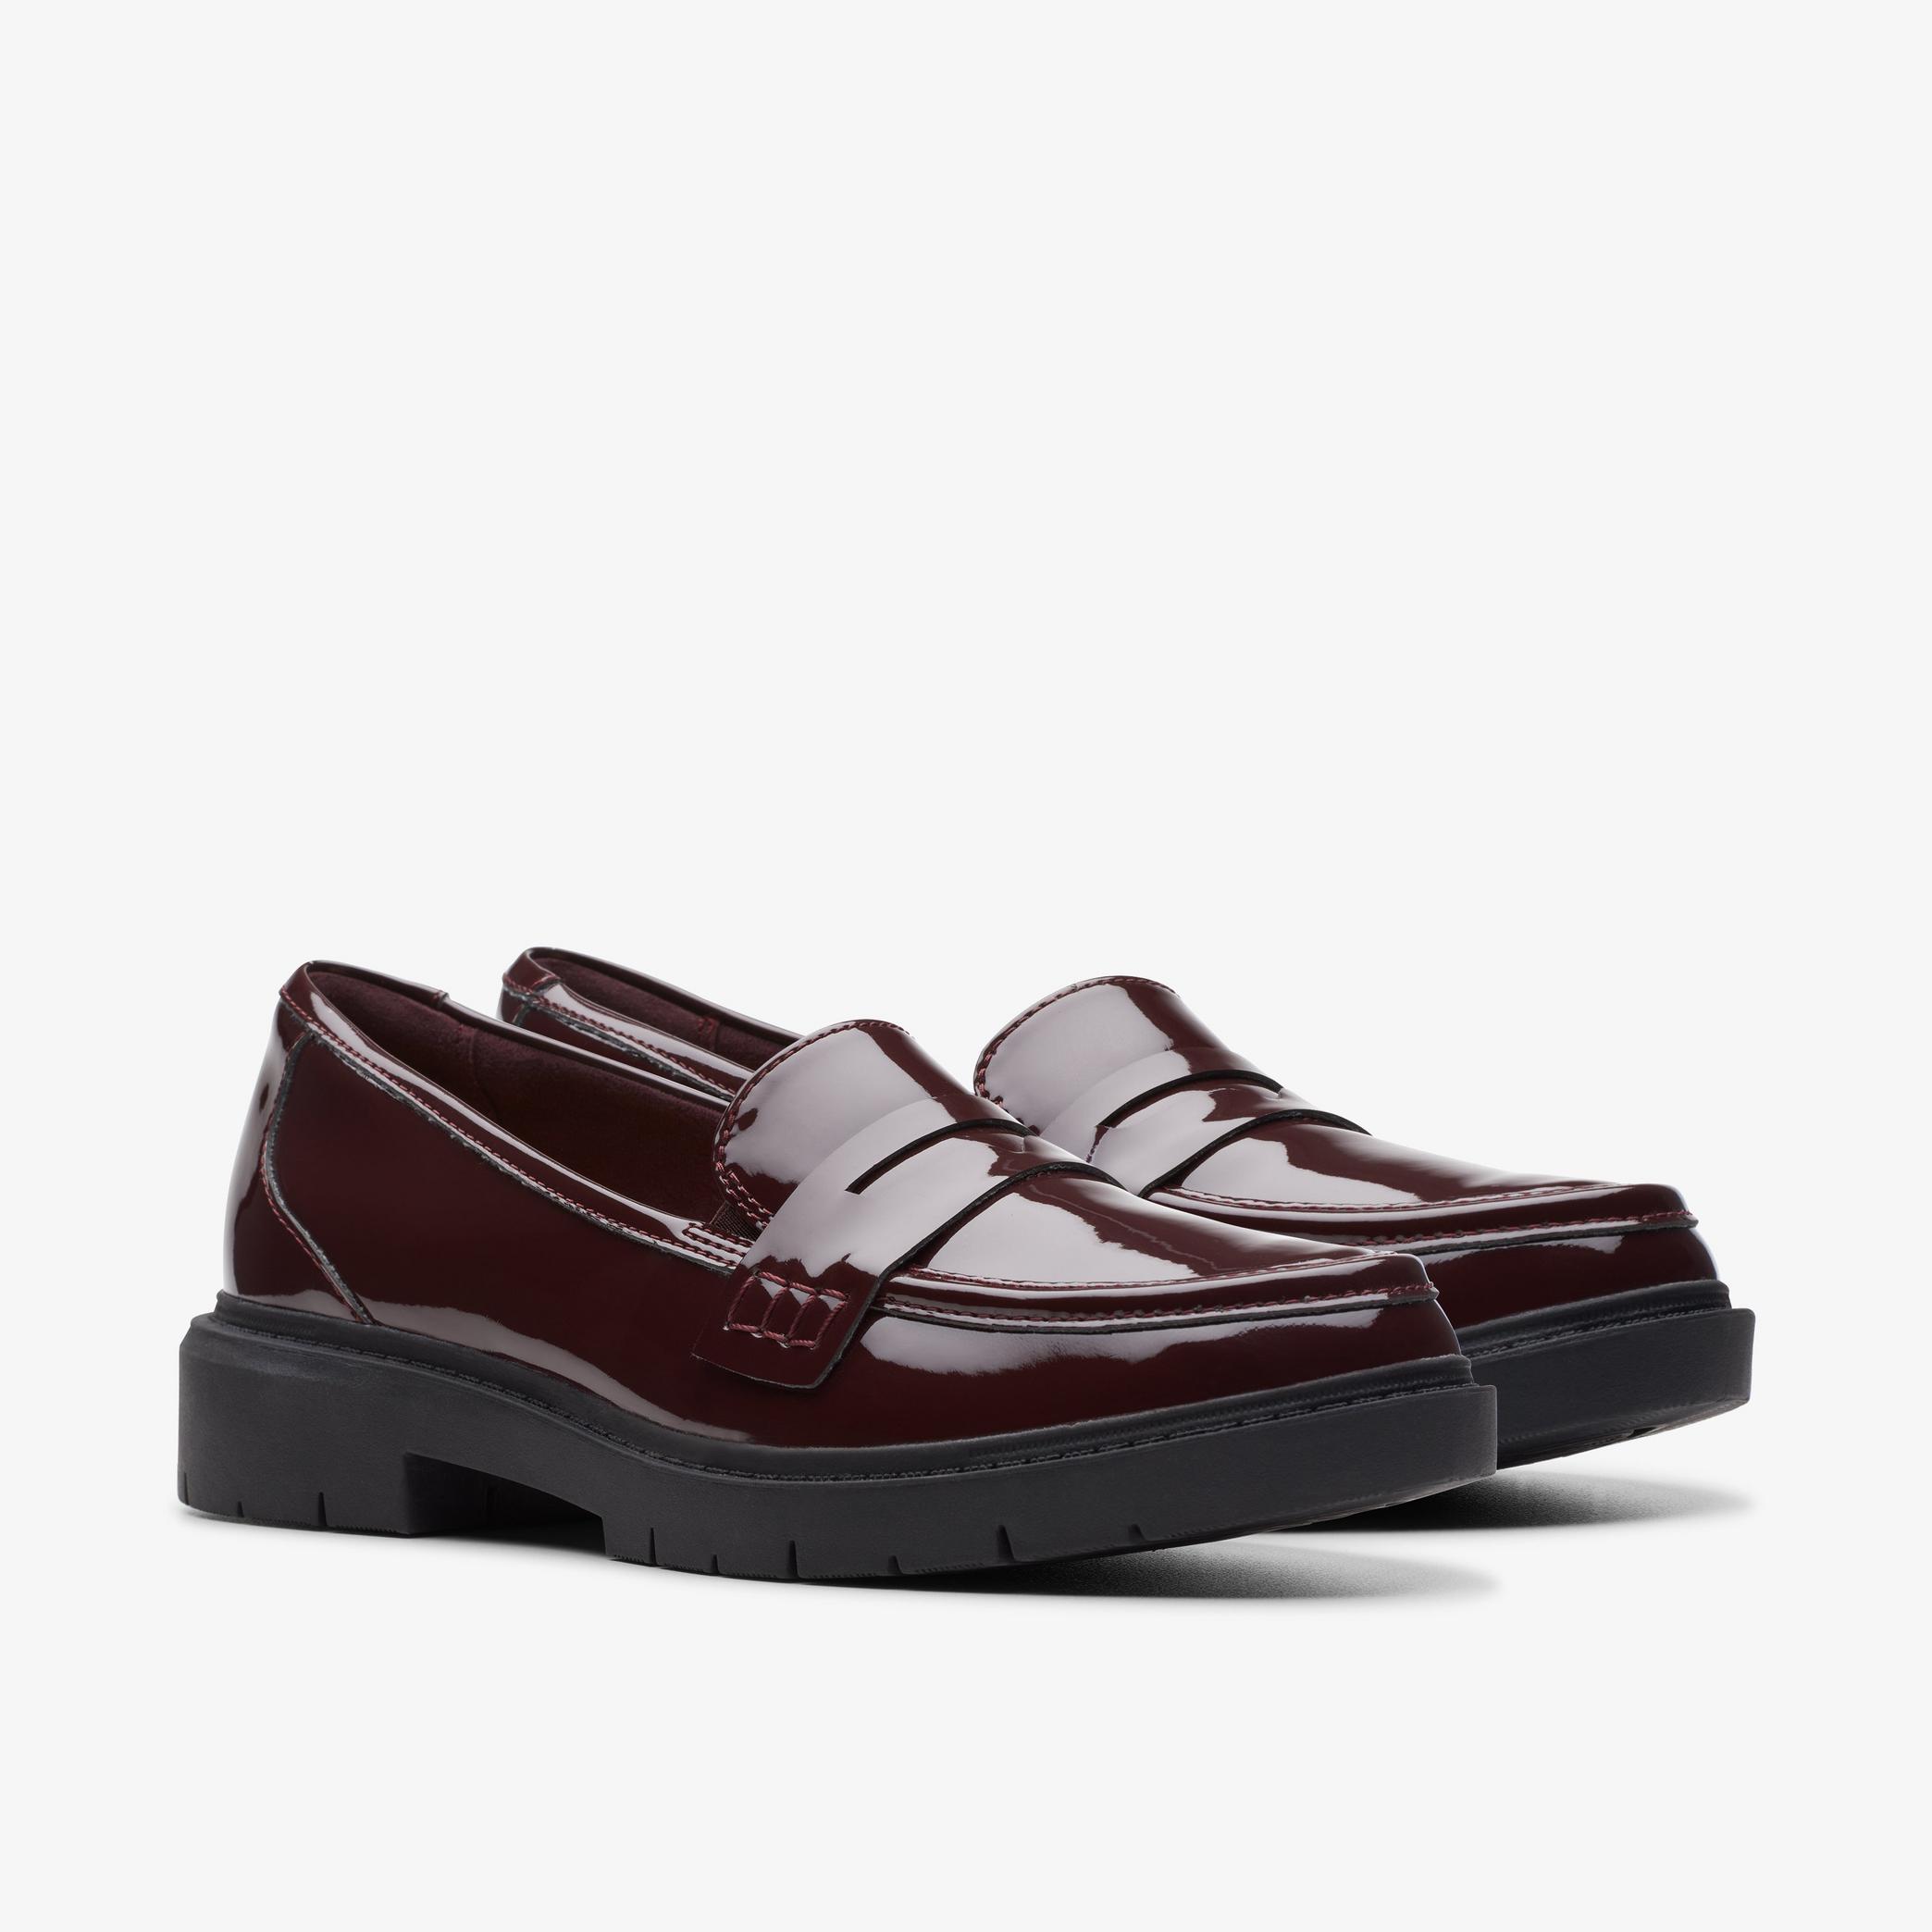 Westlynn Ayla Burgundy Patent Loafers, view 4 of 6